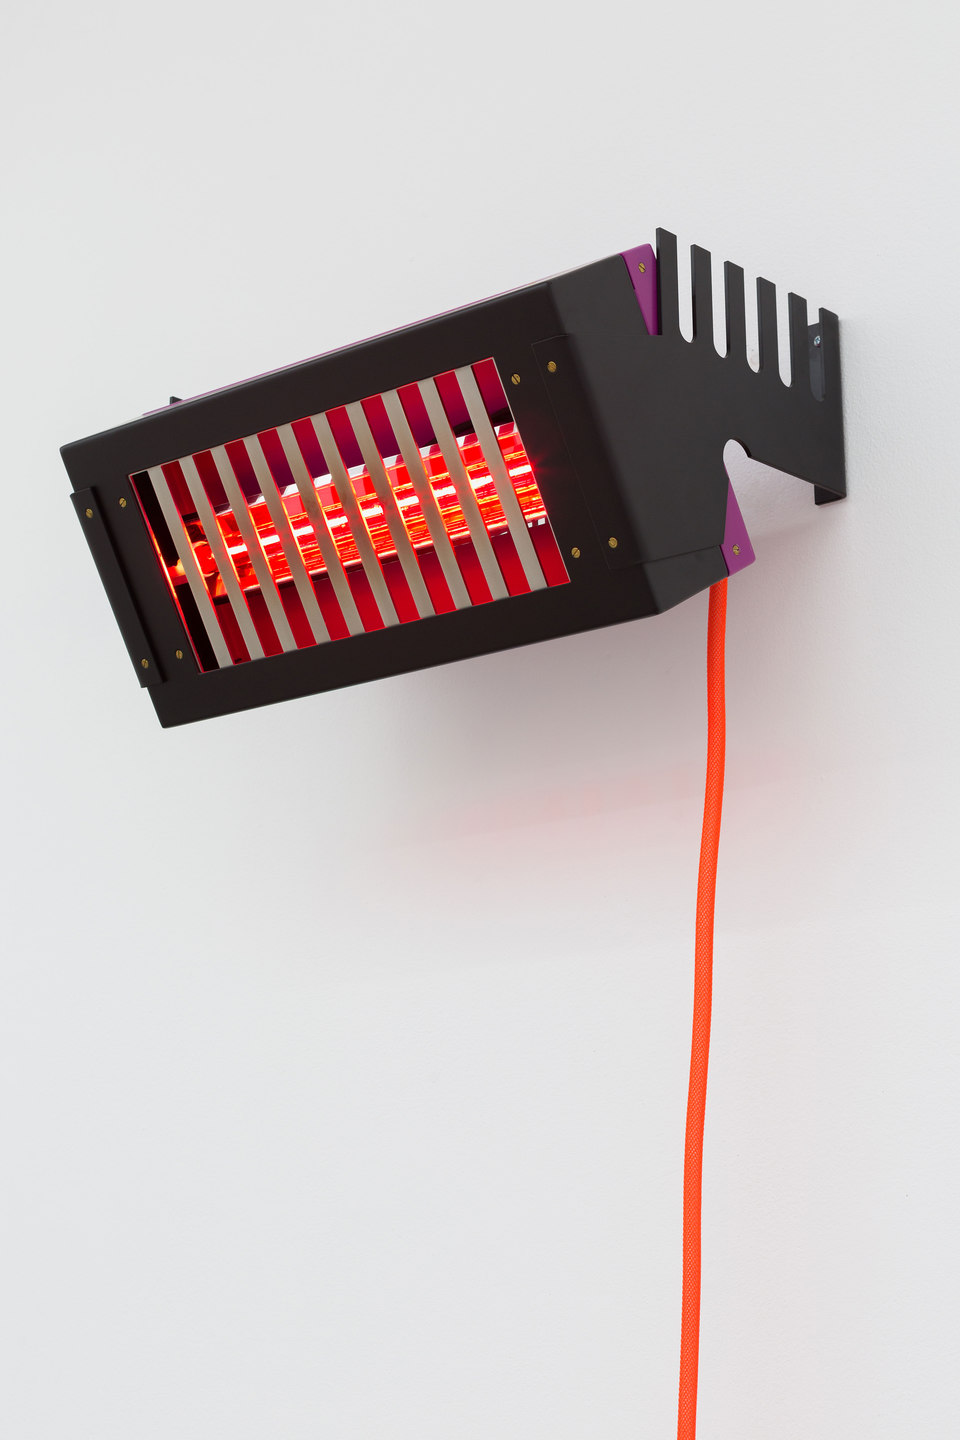 Natalie Dray, DRAY, 'Infrared Fuchsia', 2015, Cell Project Space